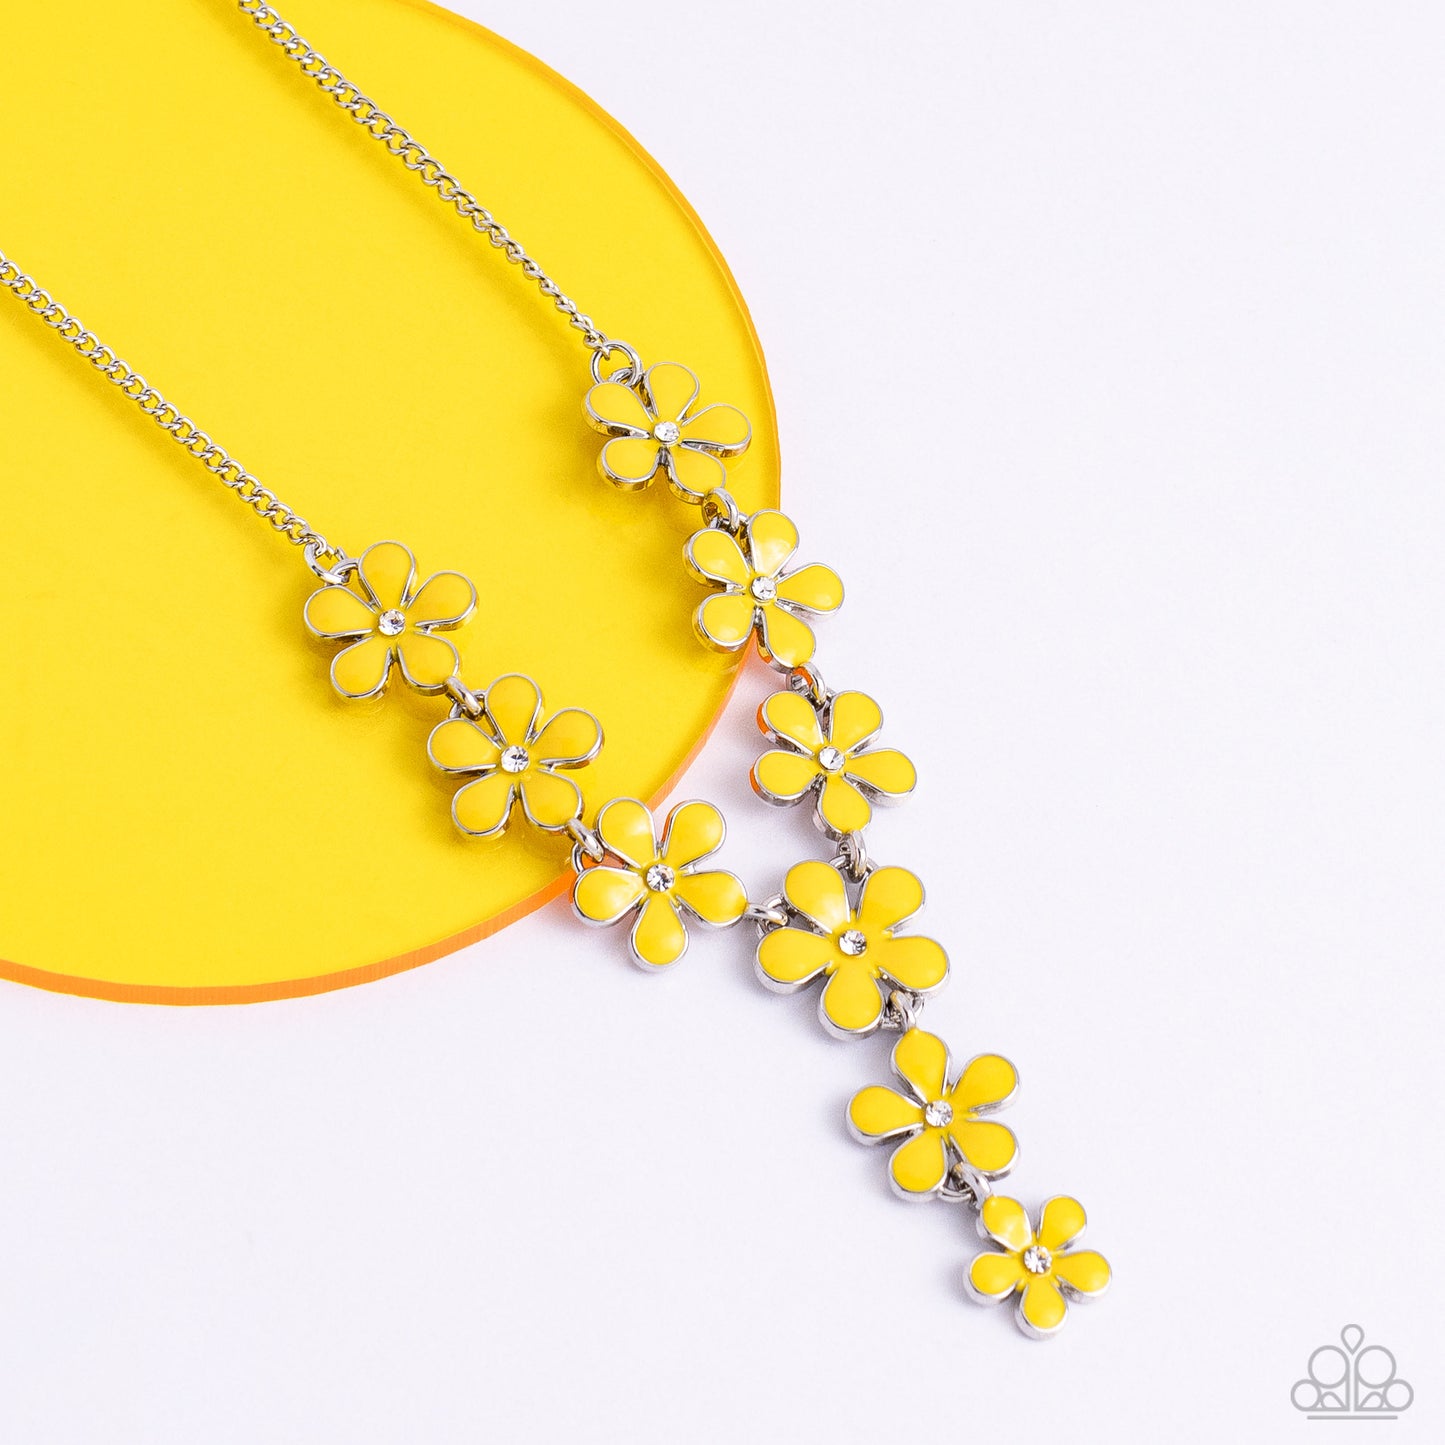 Dotted with white rhinestone centers, whimsical Primrose paint flowers delicately link into an extended pendant below the collar for an ethereal fashion. Features an adjustable clasp closure.  Sold as one individual necklace. Includes one pair of matching earrings.